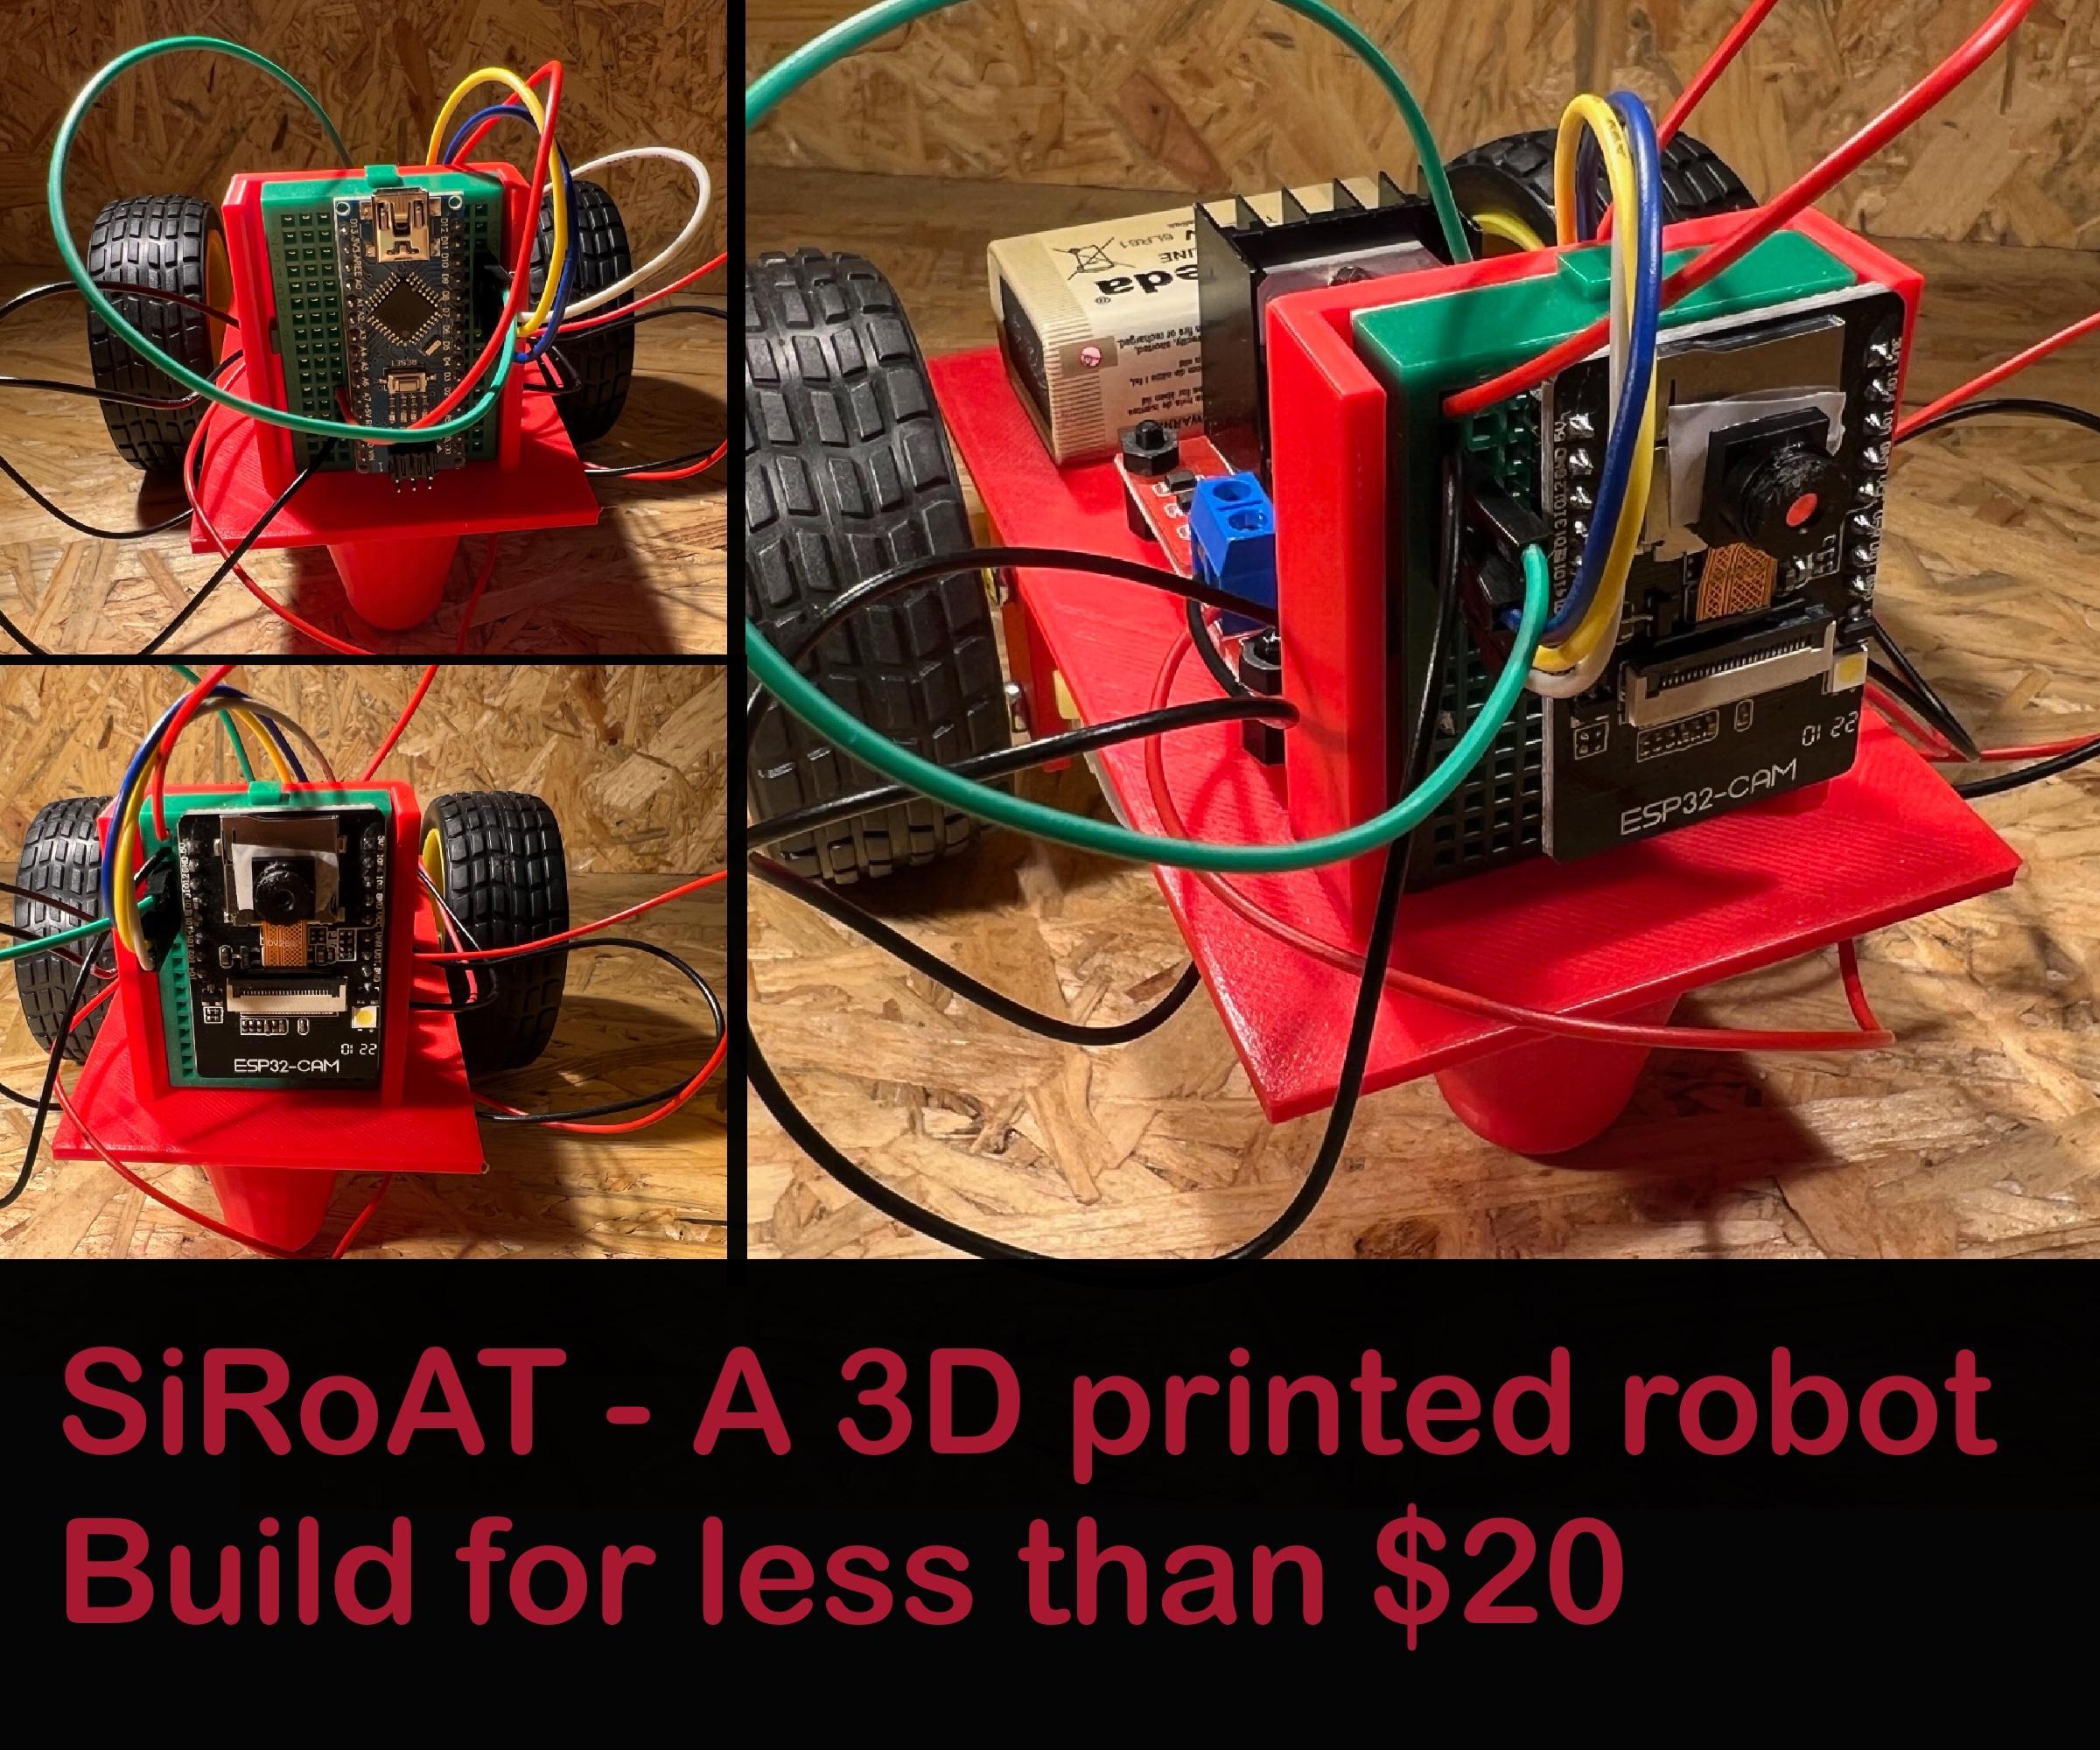 SiRoAT - a Robot for 5 Volt Microcontrollers